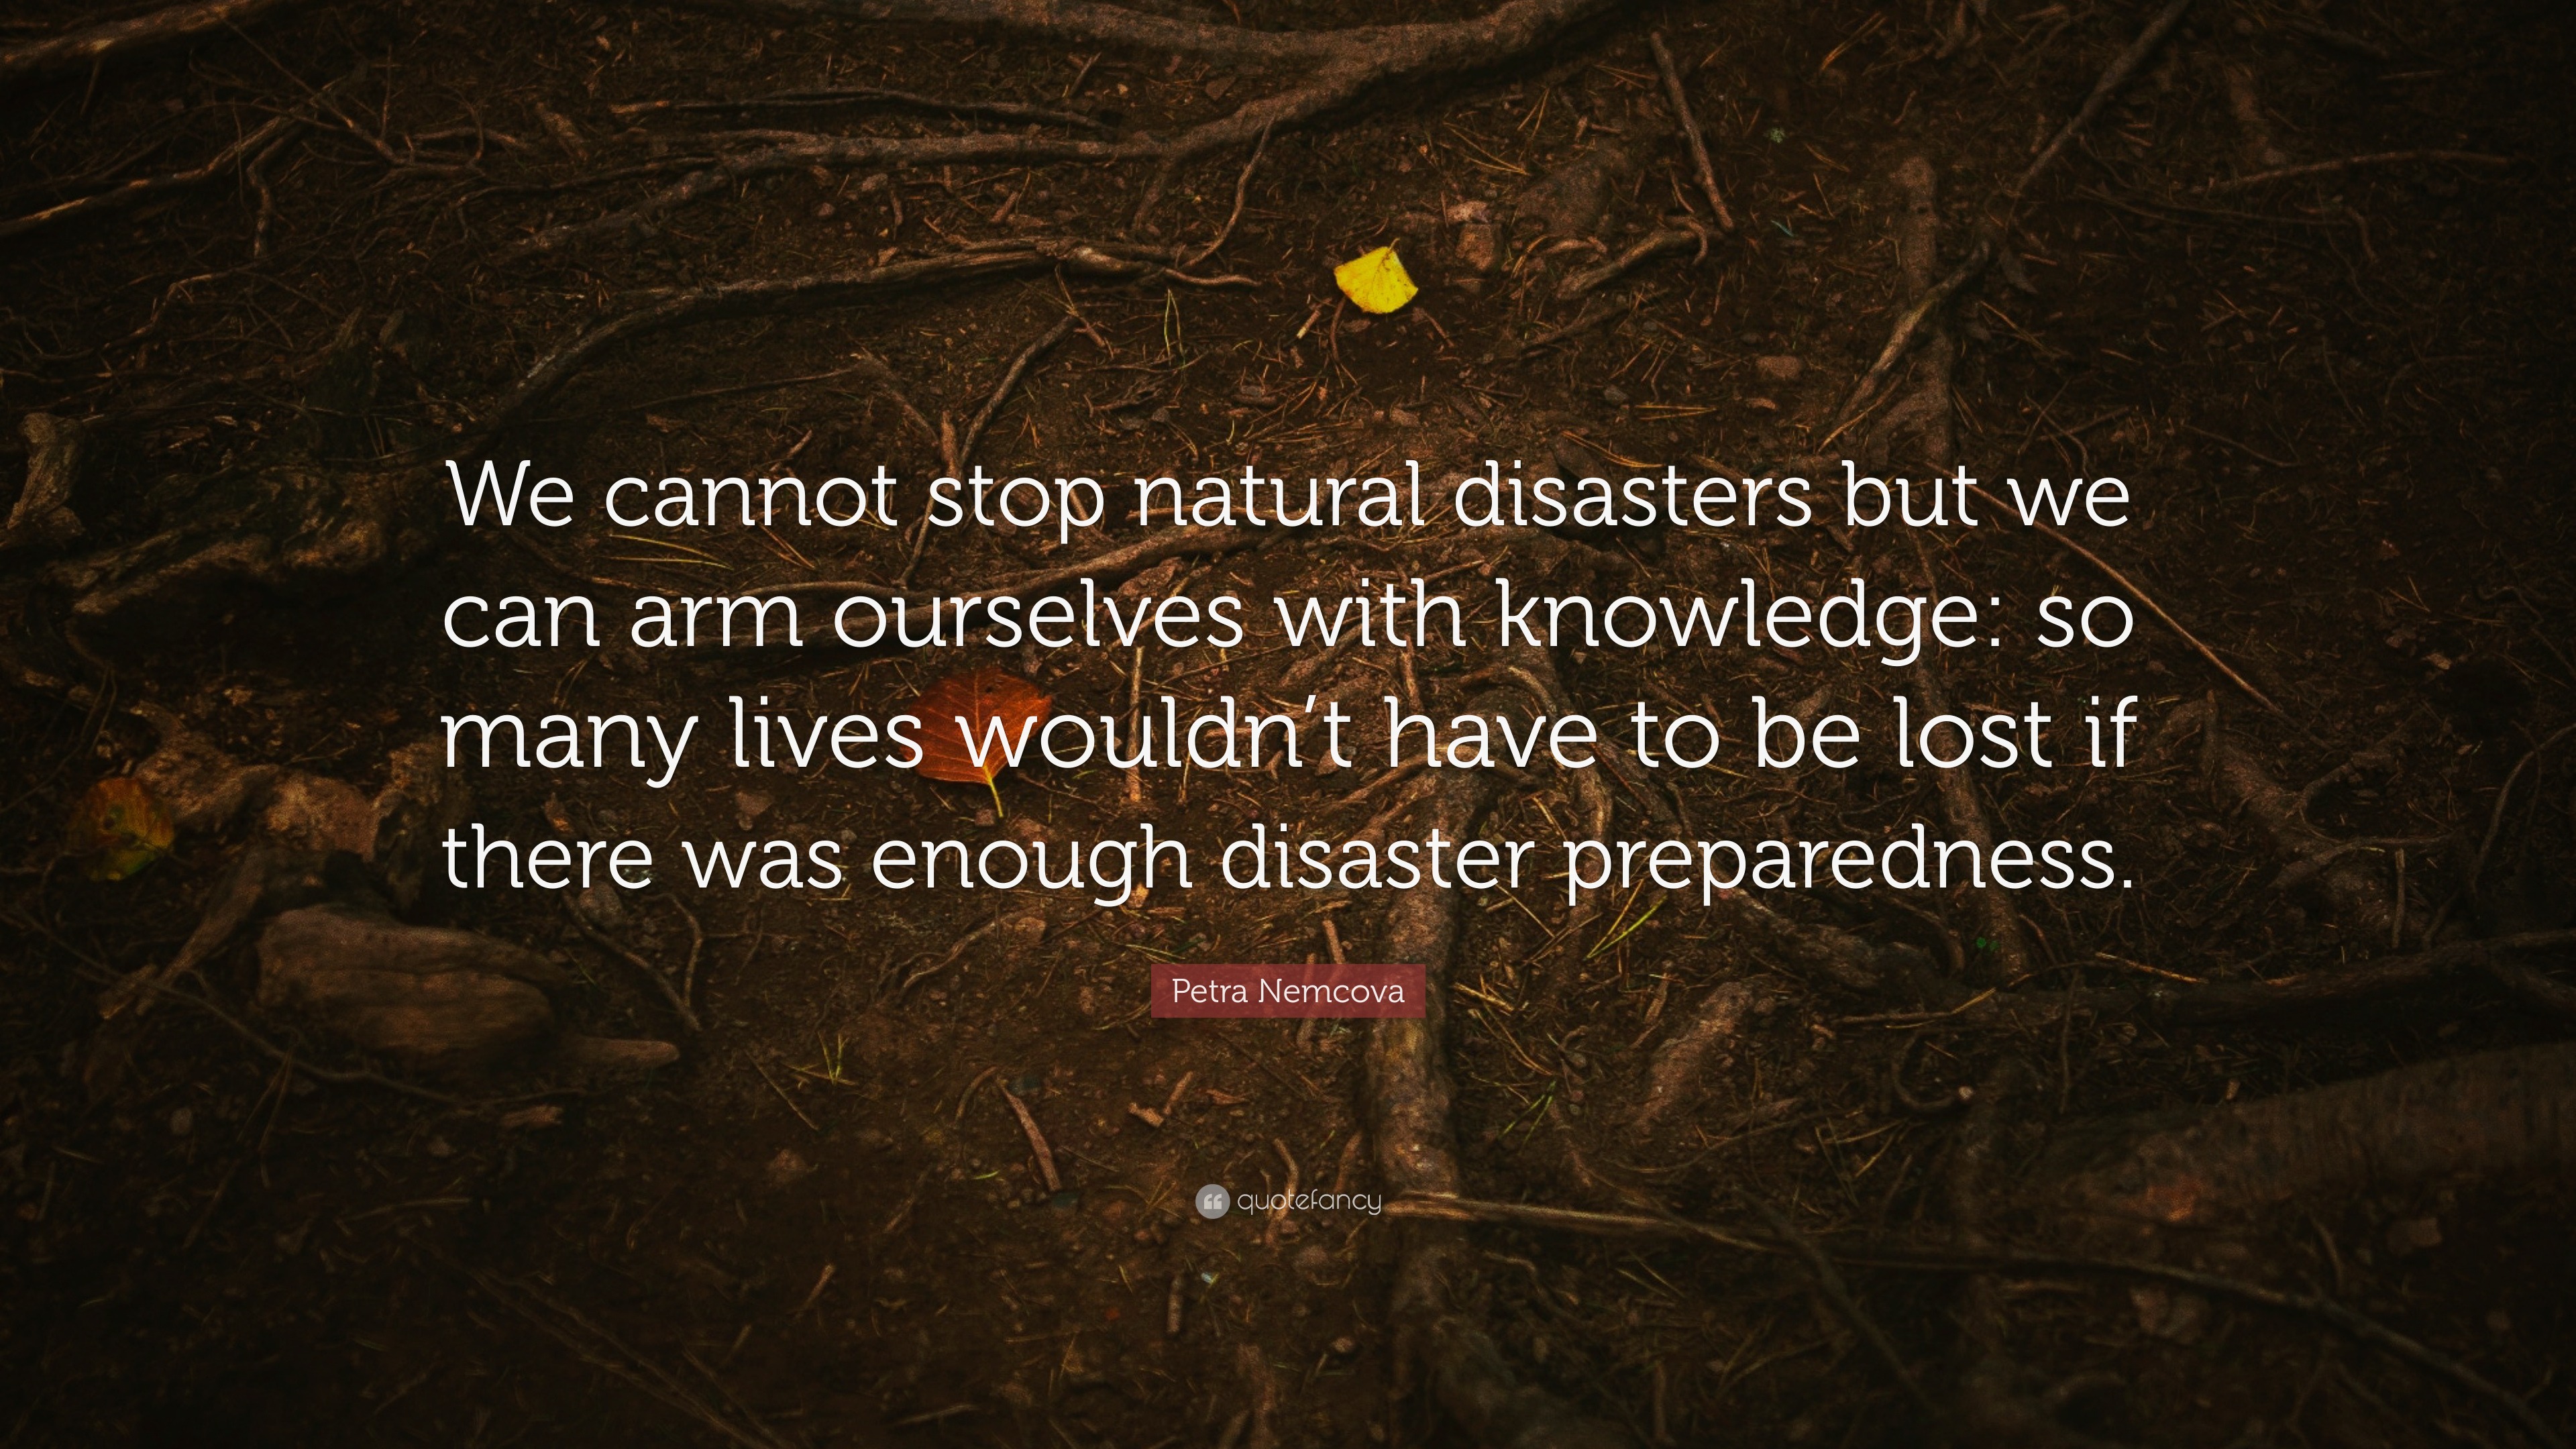 Petra Nemcova Quote: “We cannot stop natural disasters but we can arm